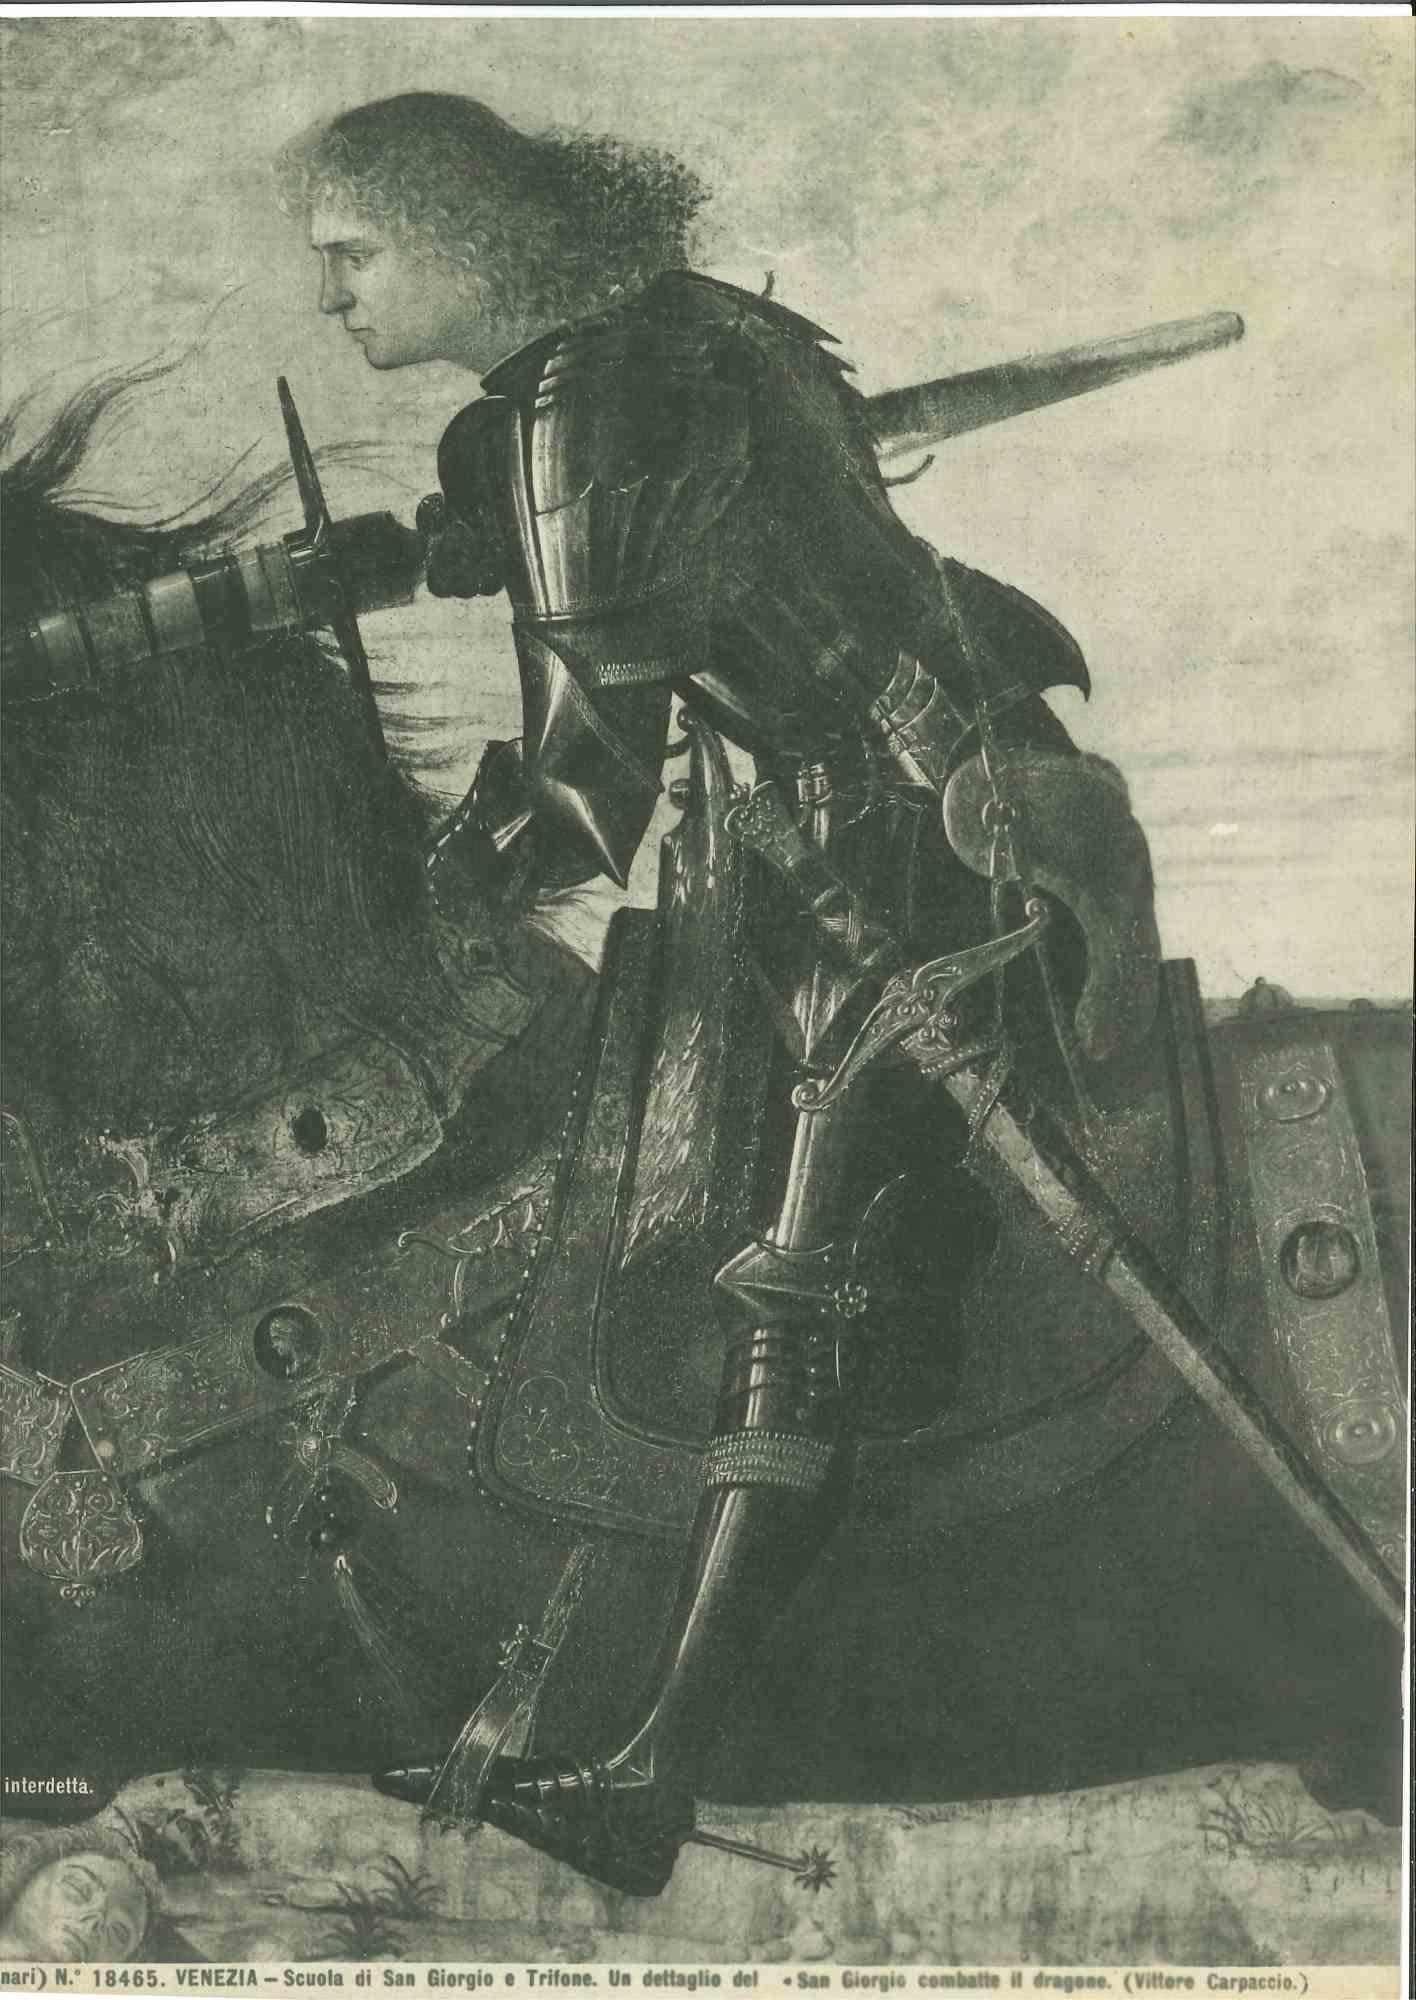 Architecture and Art Photo - Saint George Fights the Dragon - Venice - 1920s